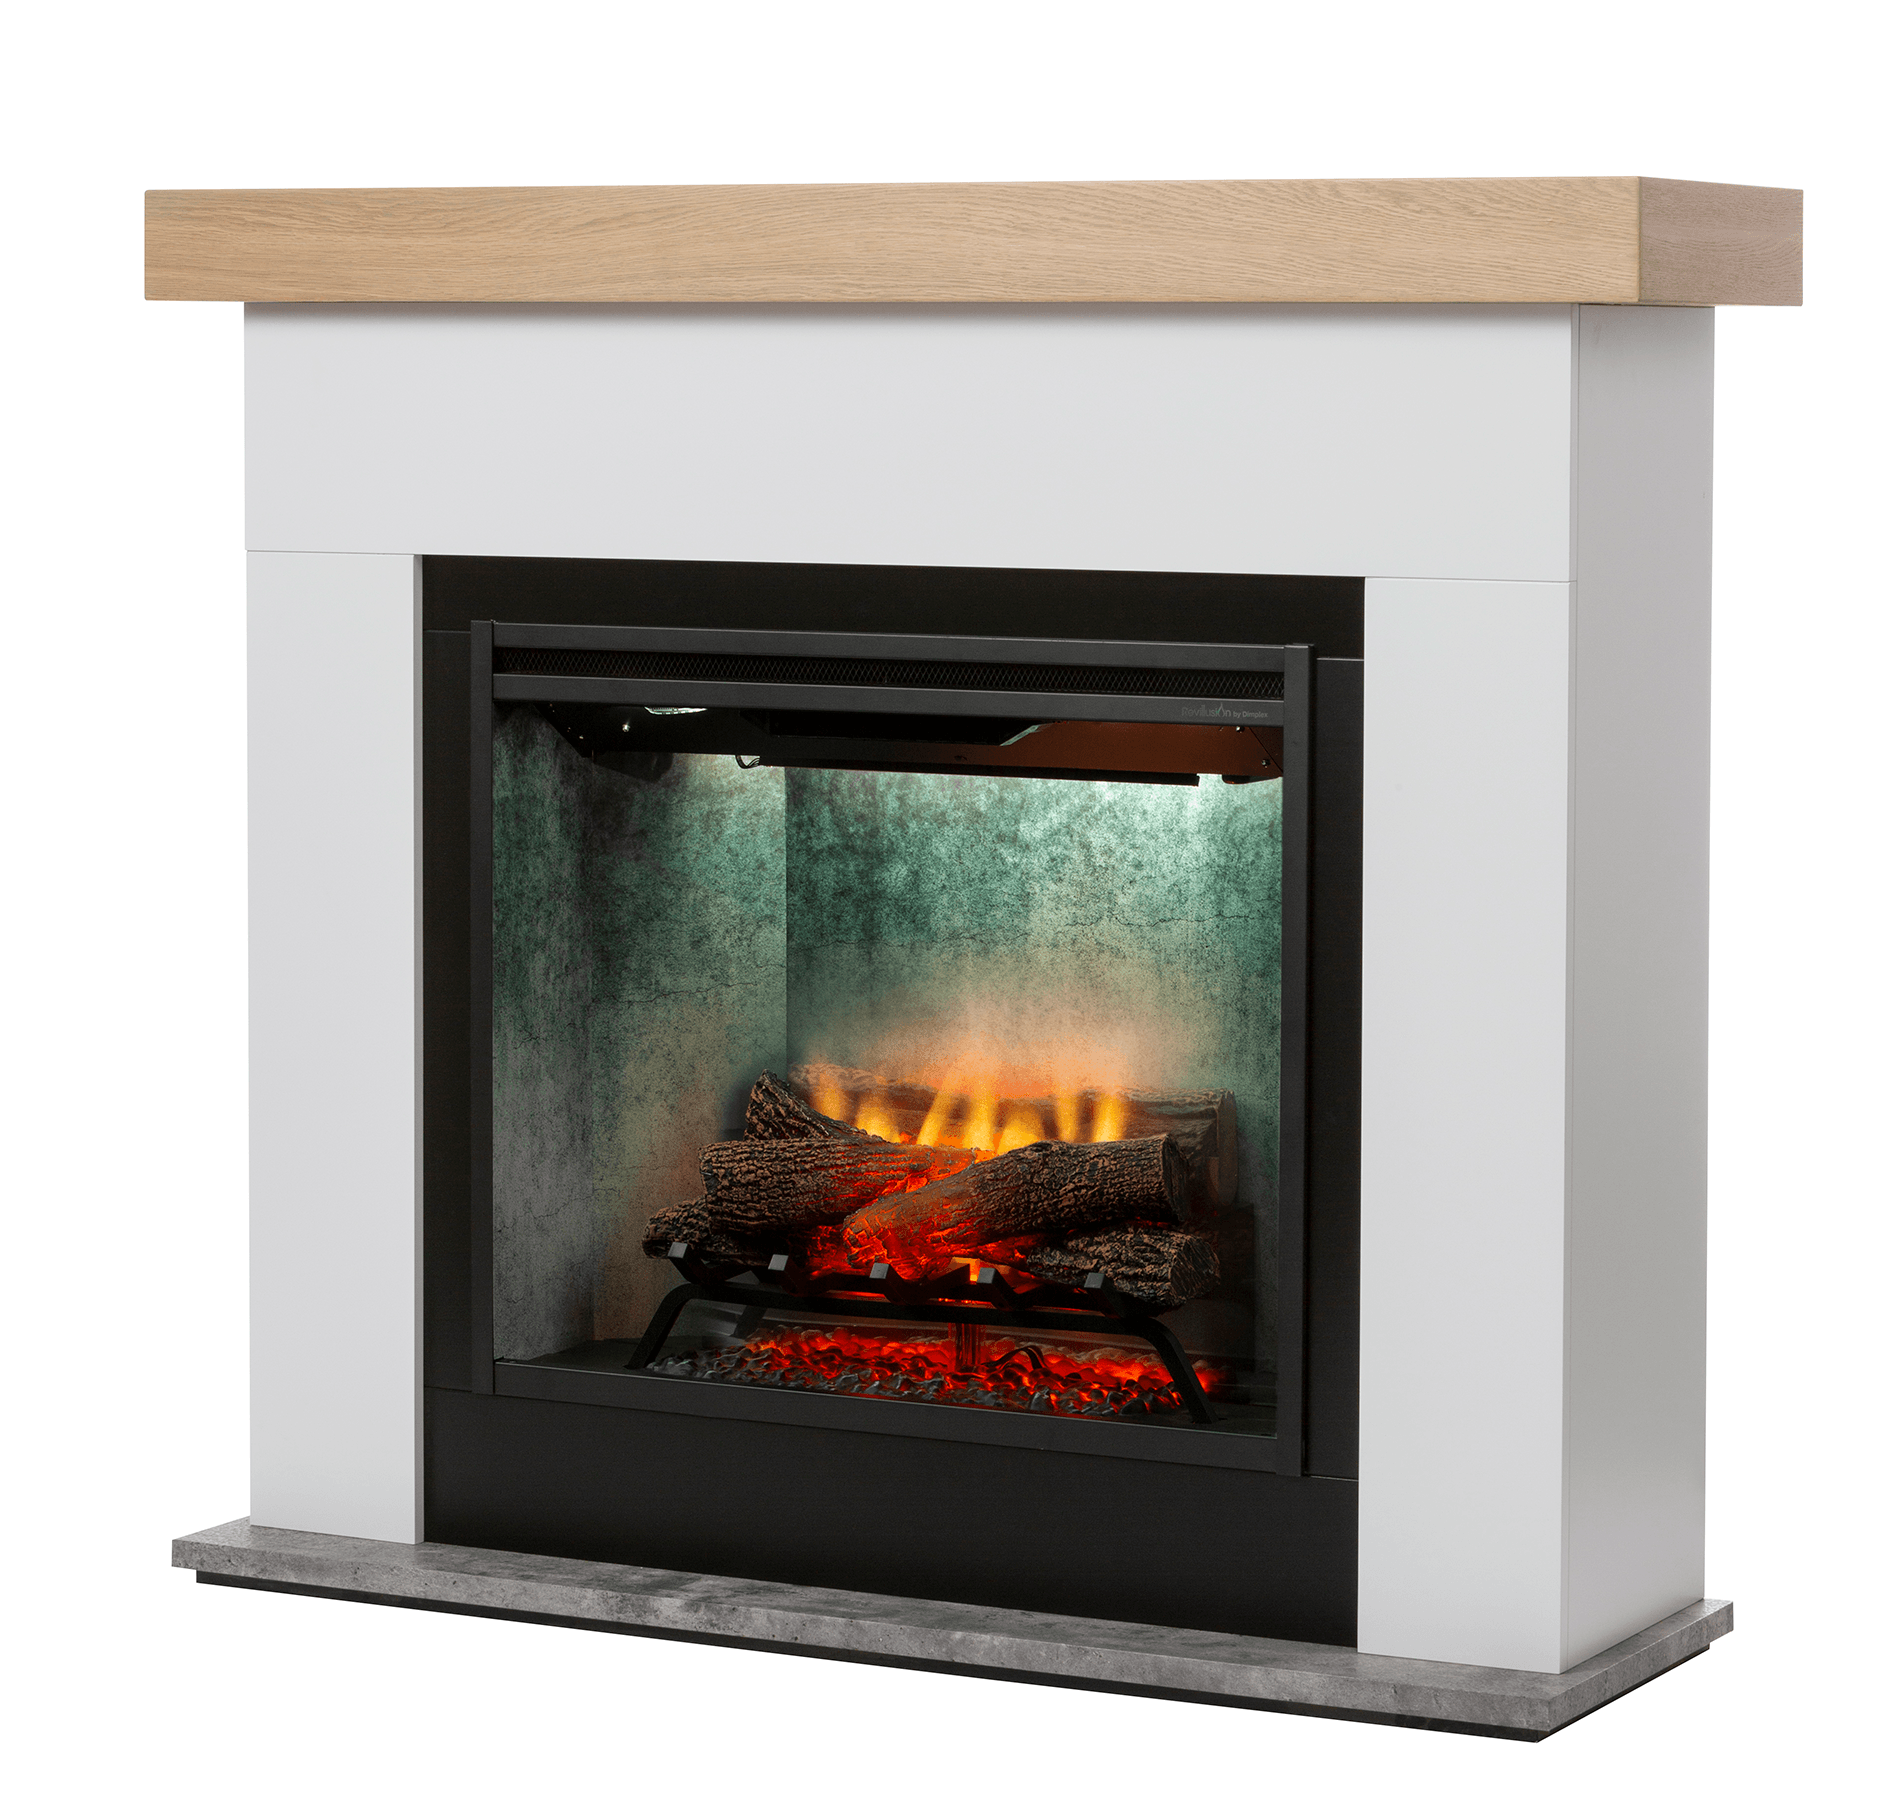 Dimplex 2kW Huxley Mantle with 30 Revillusion Firebox with Concrete Finish